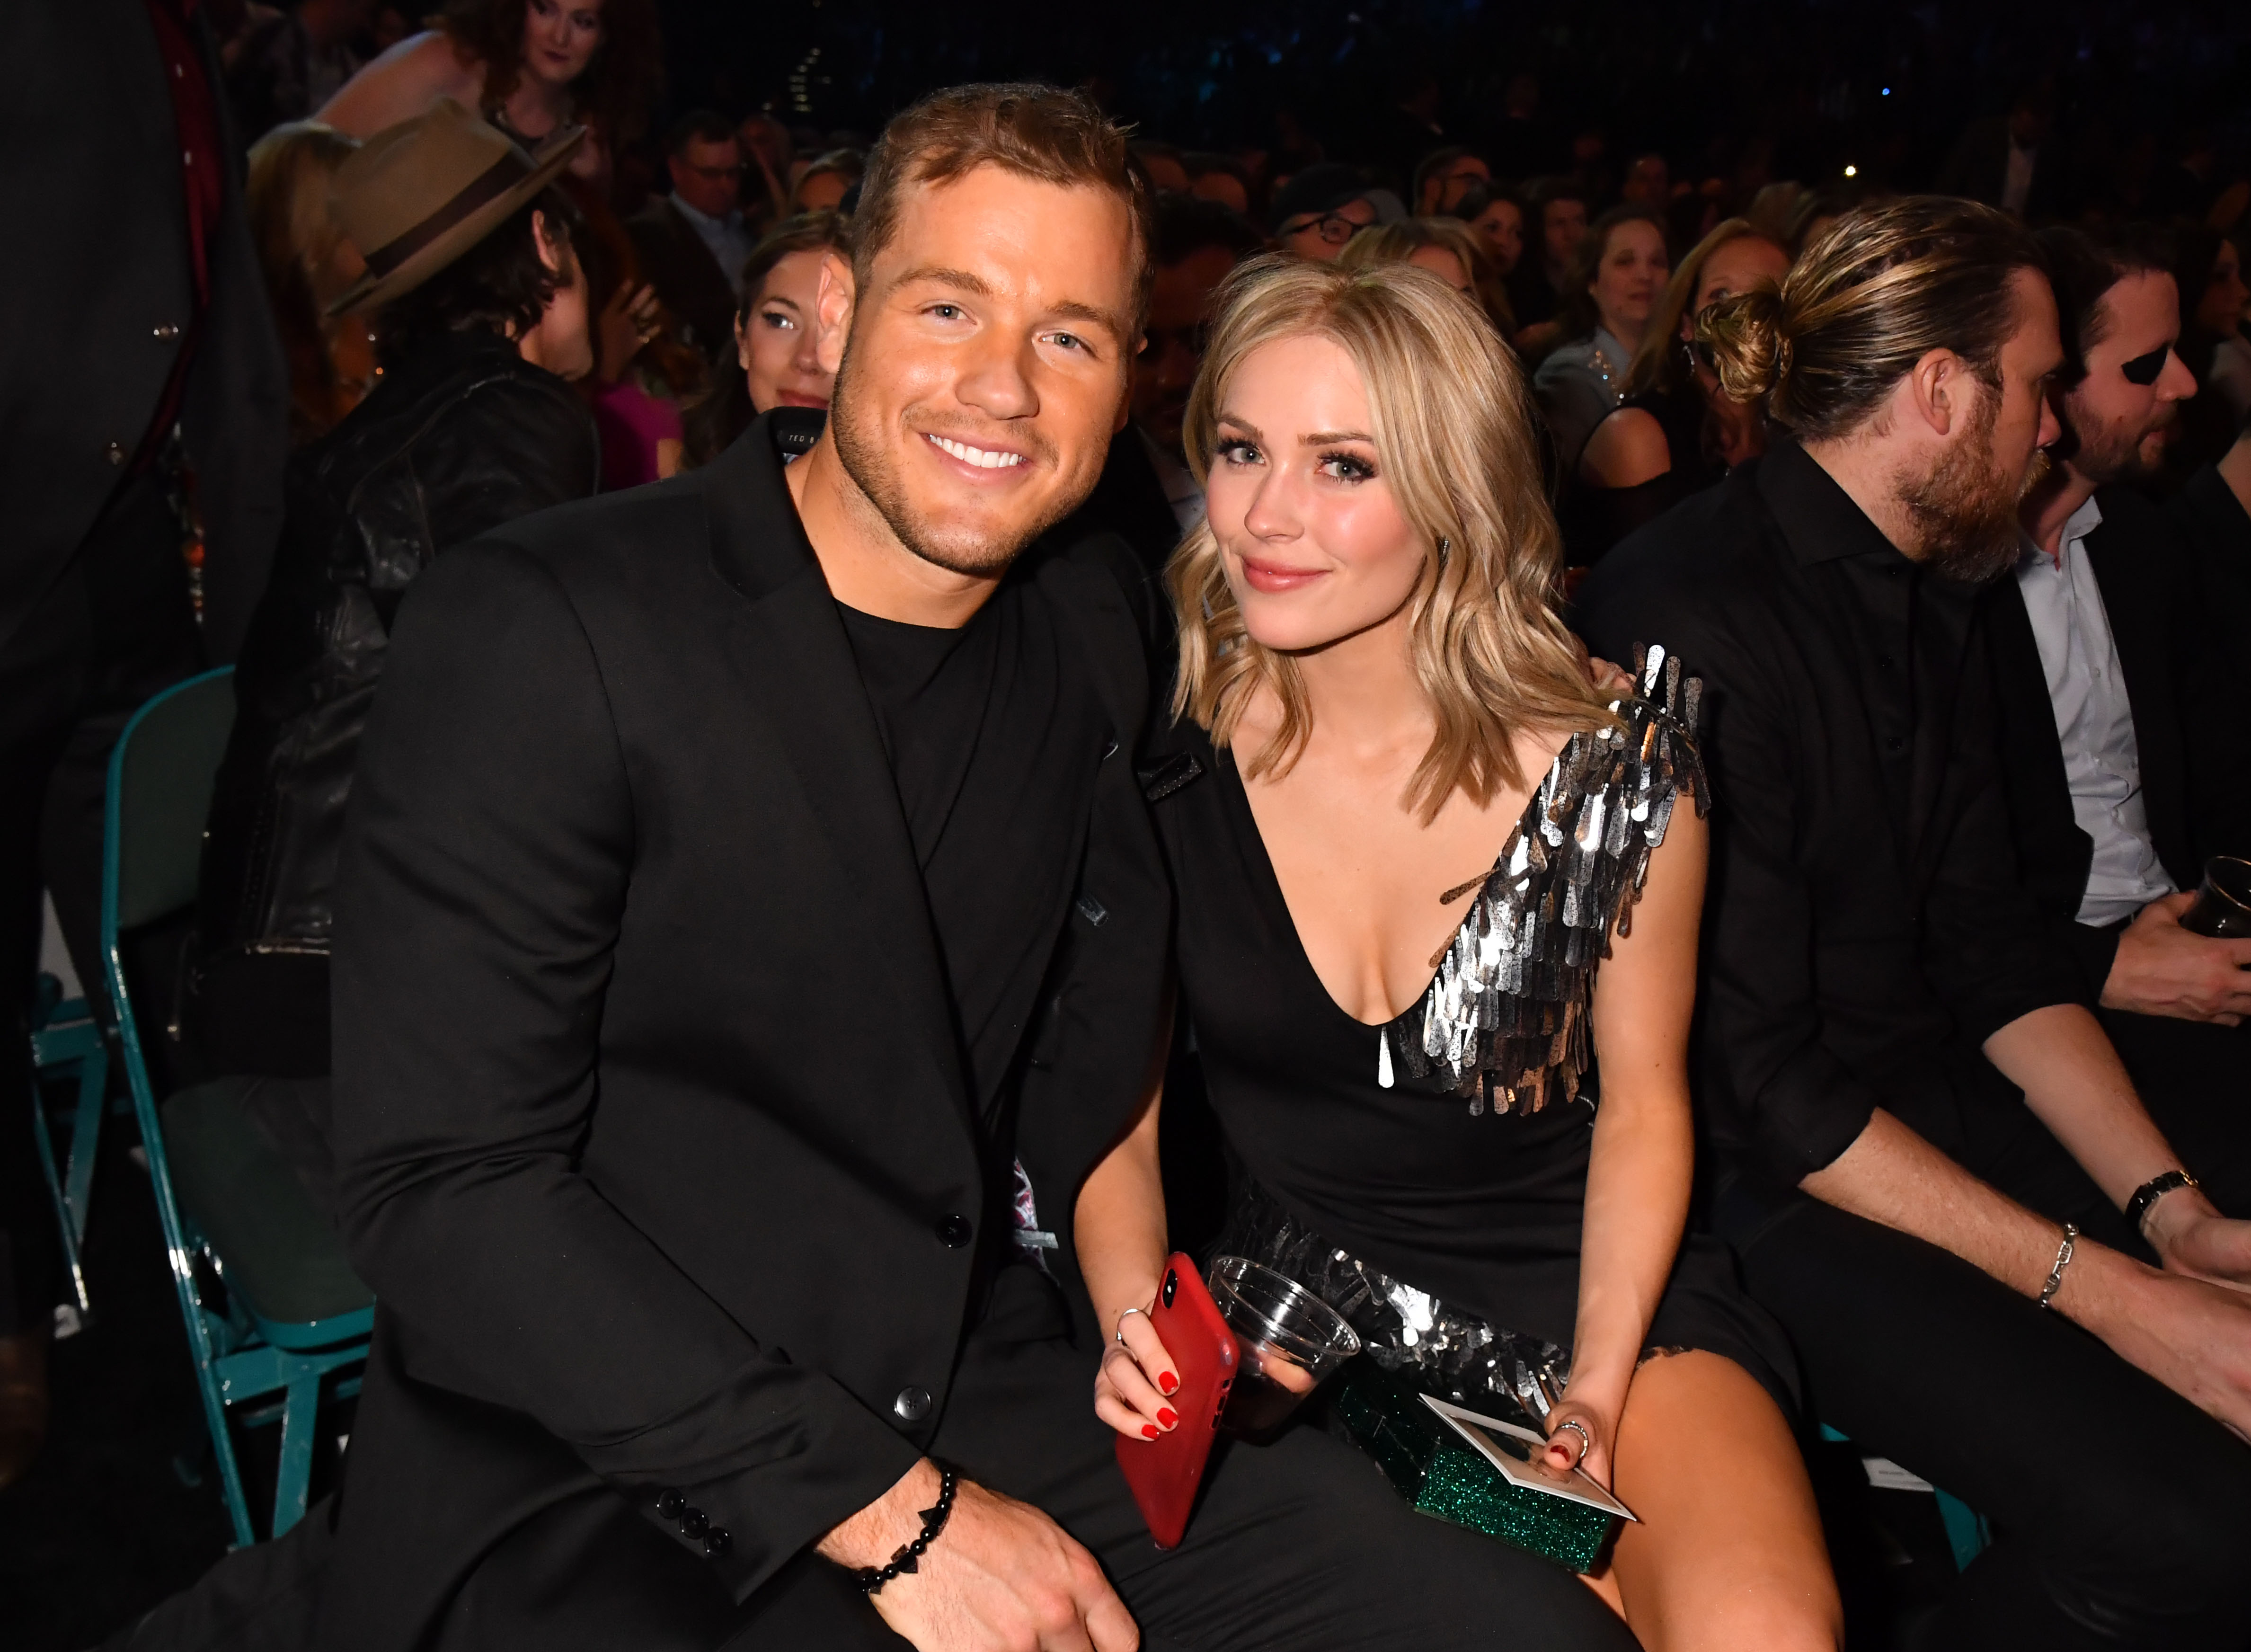 Colton Underwood and Cassie Randolph at the 54th Academy Of Country Music Awards